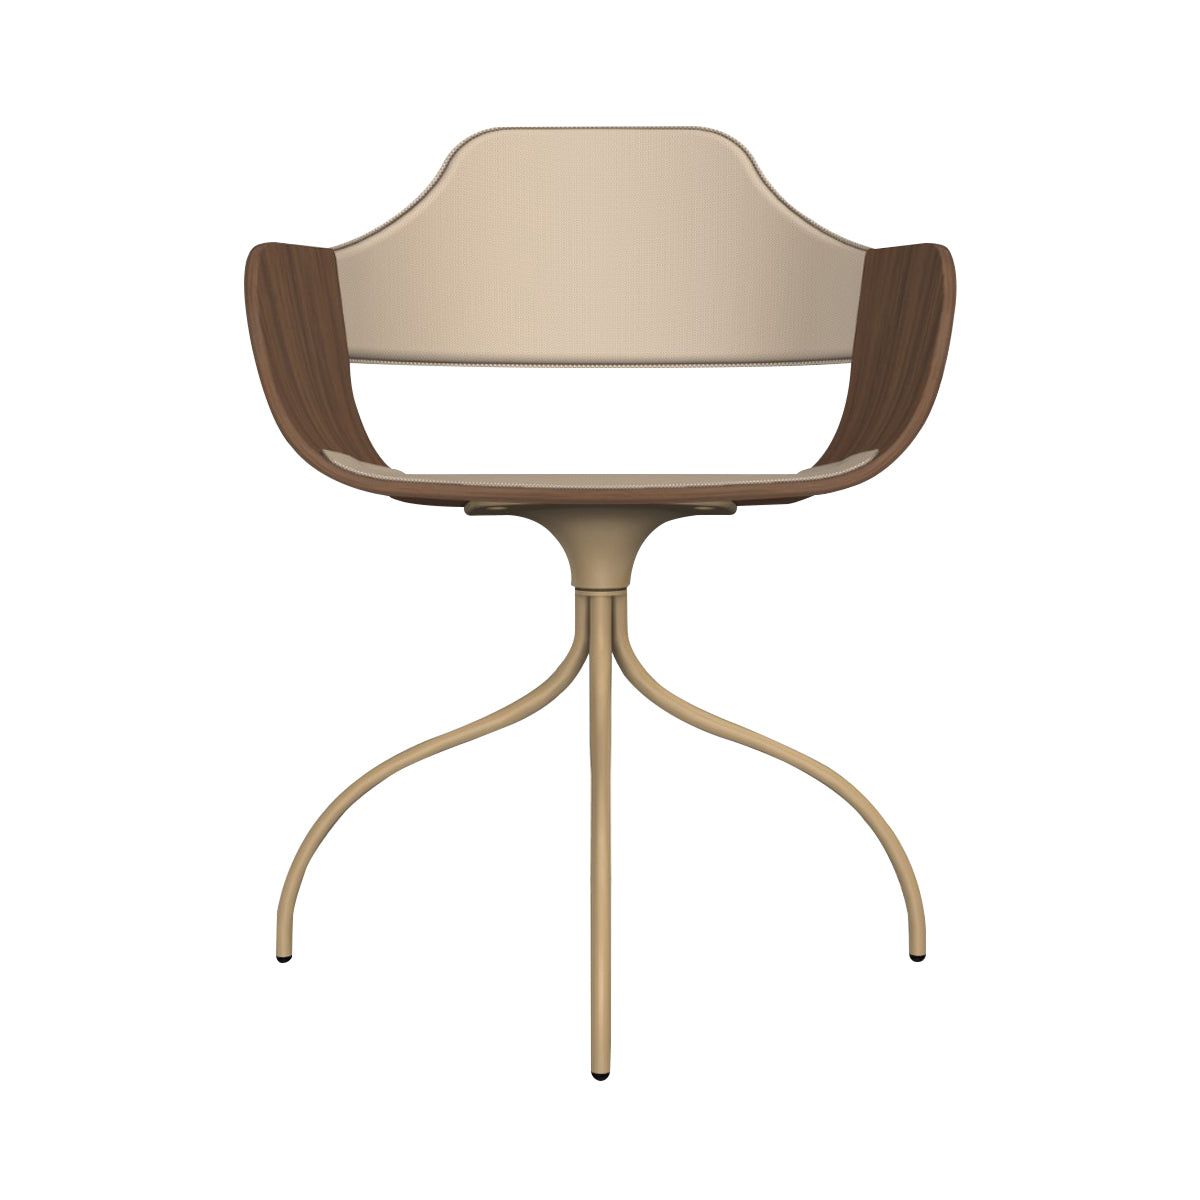 Showtime Chair with Swivel Base: Seat + Backrest Upholstered + Beige